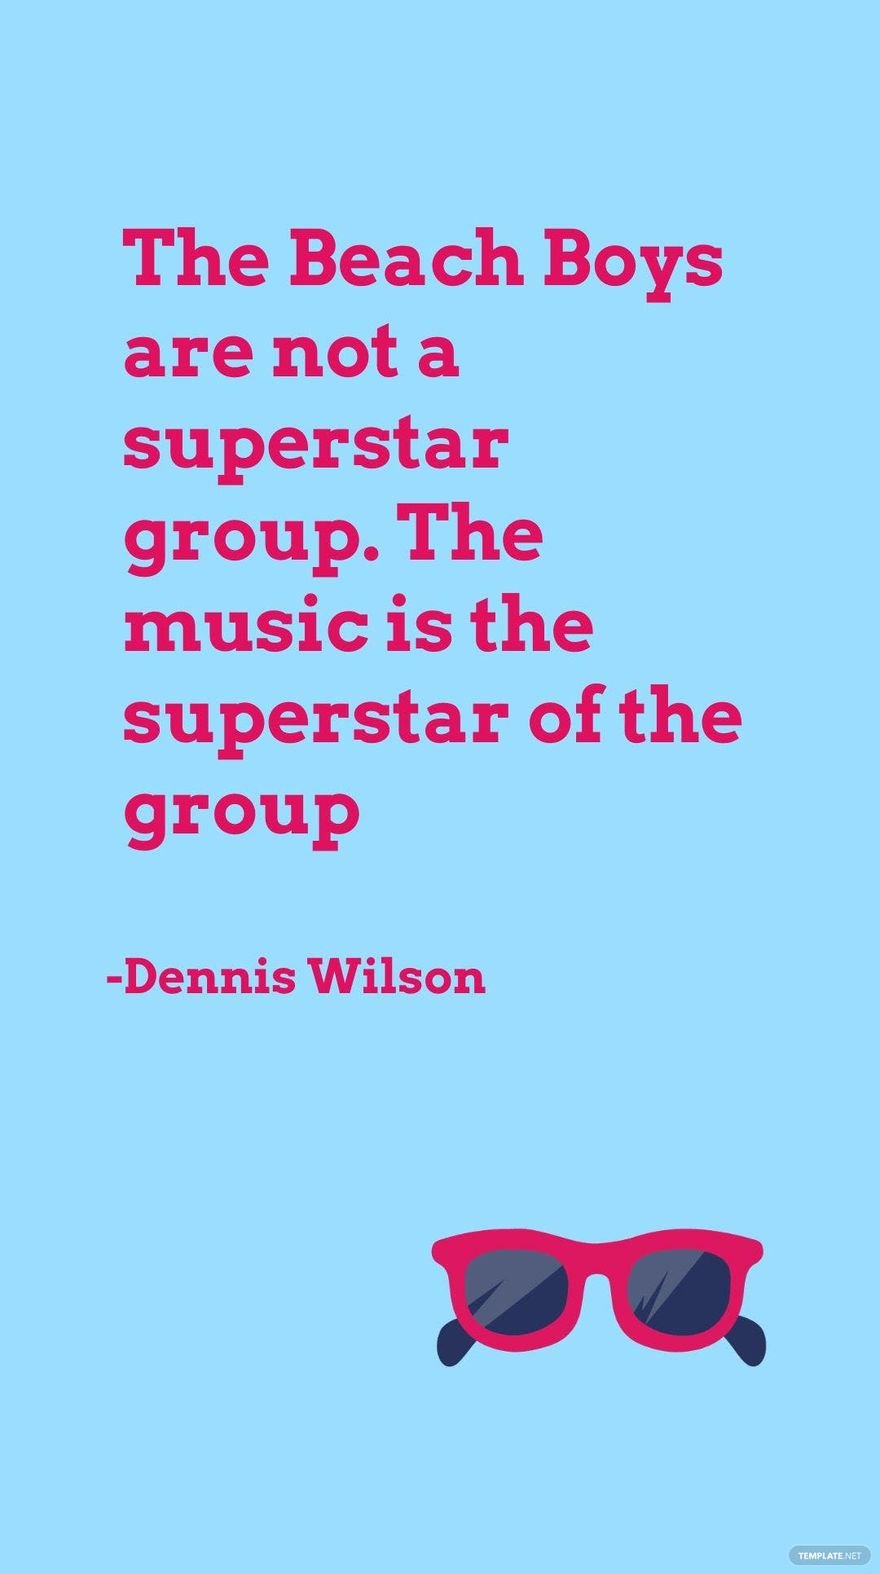 Dennis Wilson - The Beach Boys are not a superstar group. The music is the superstar of the group in JPG